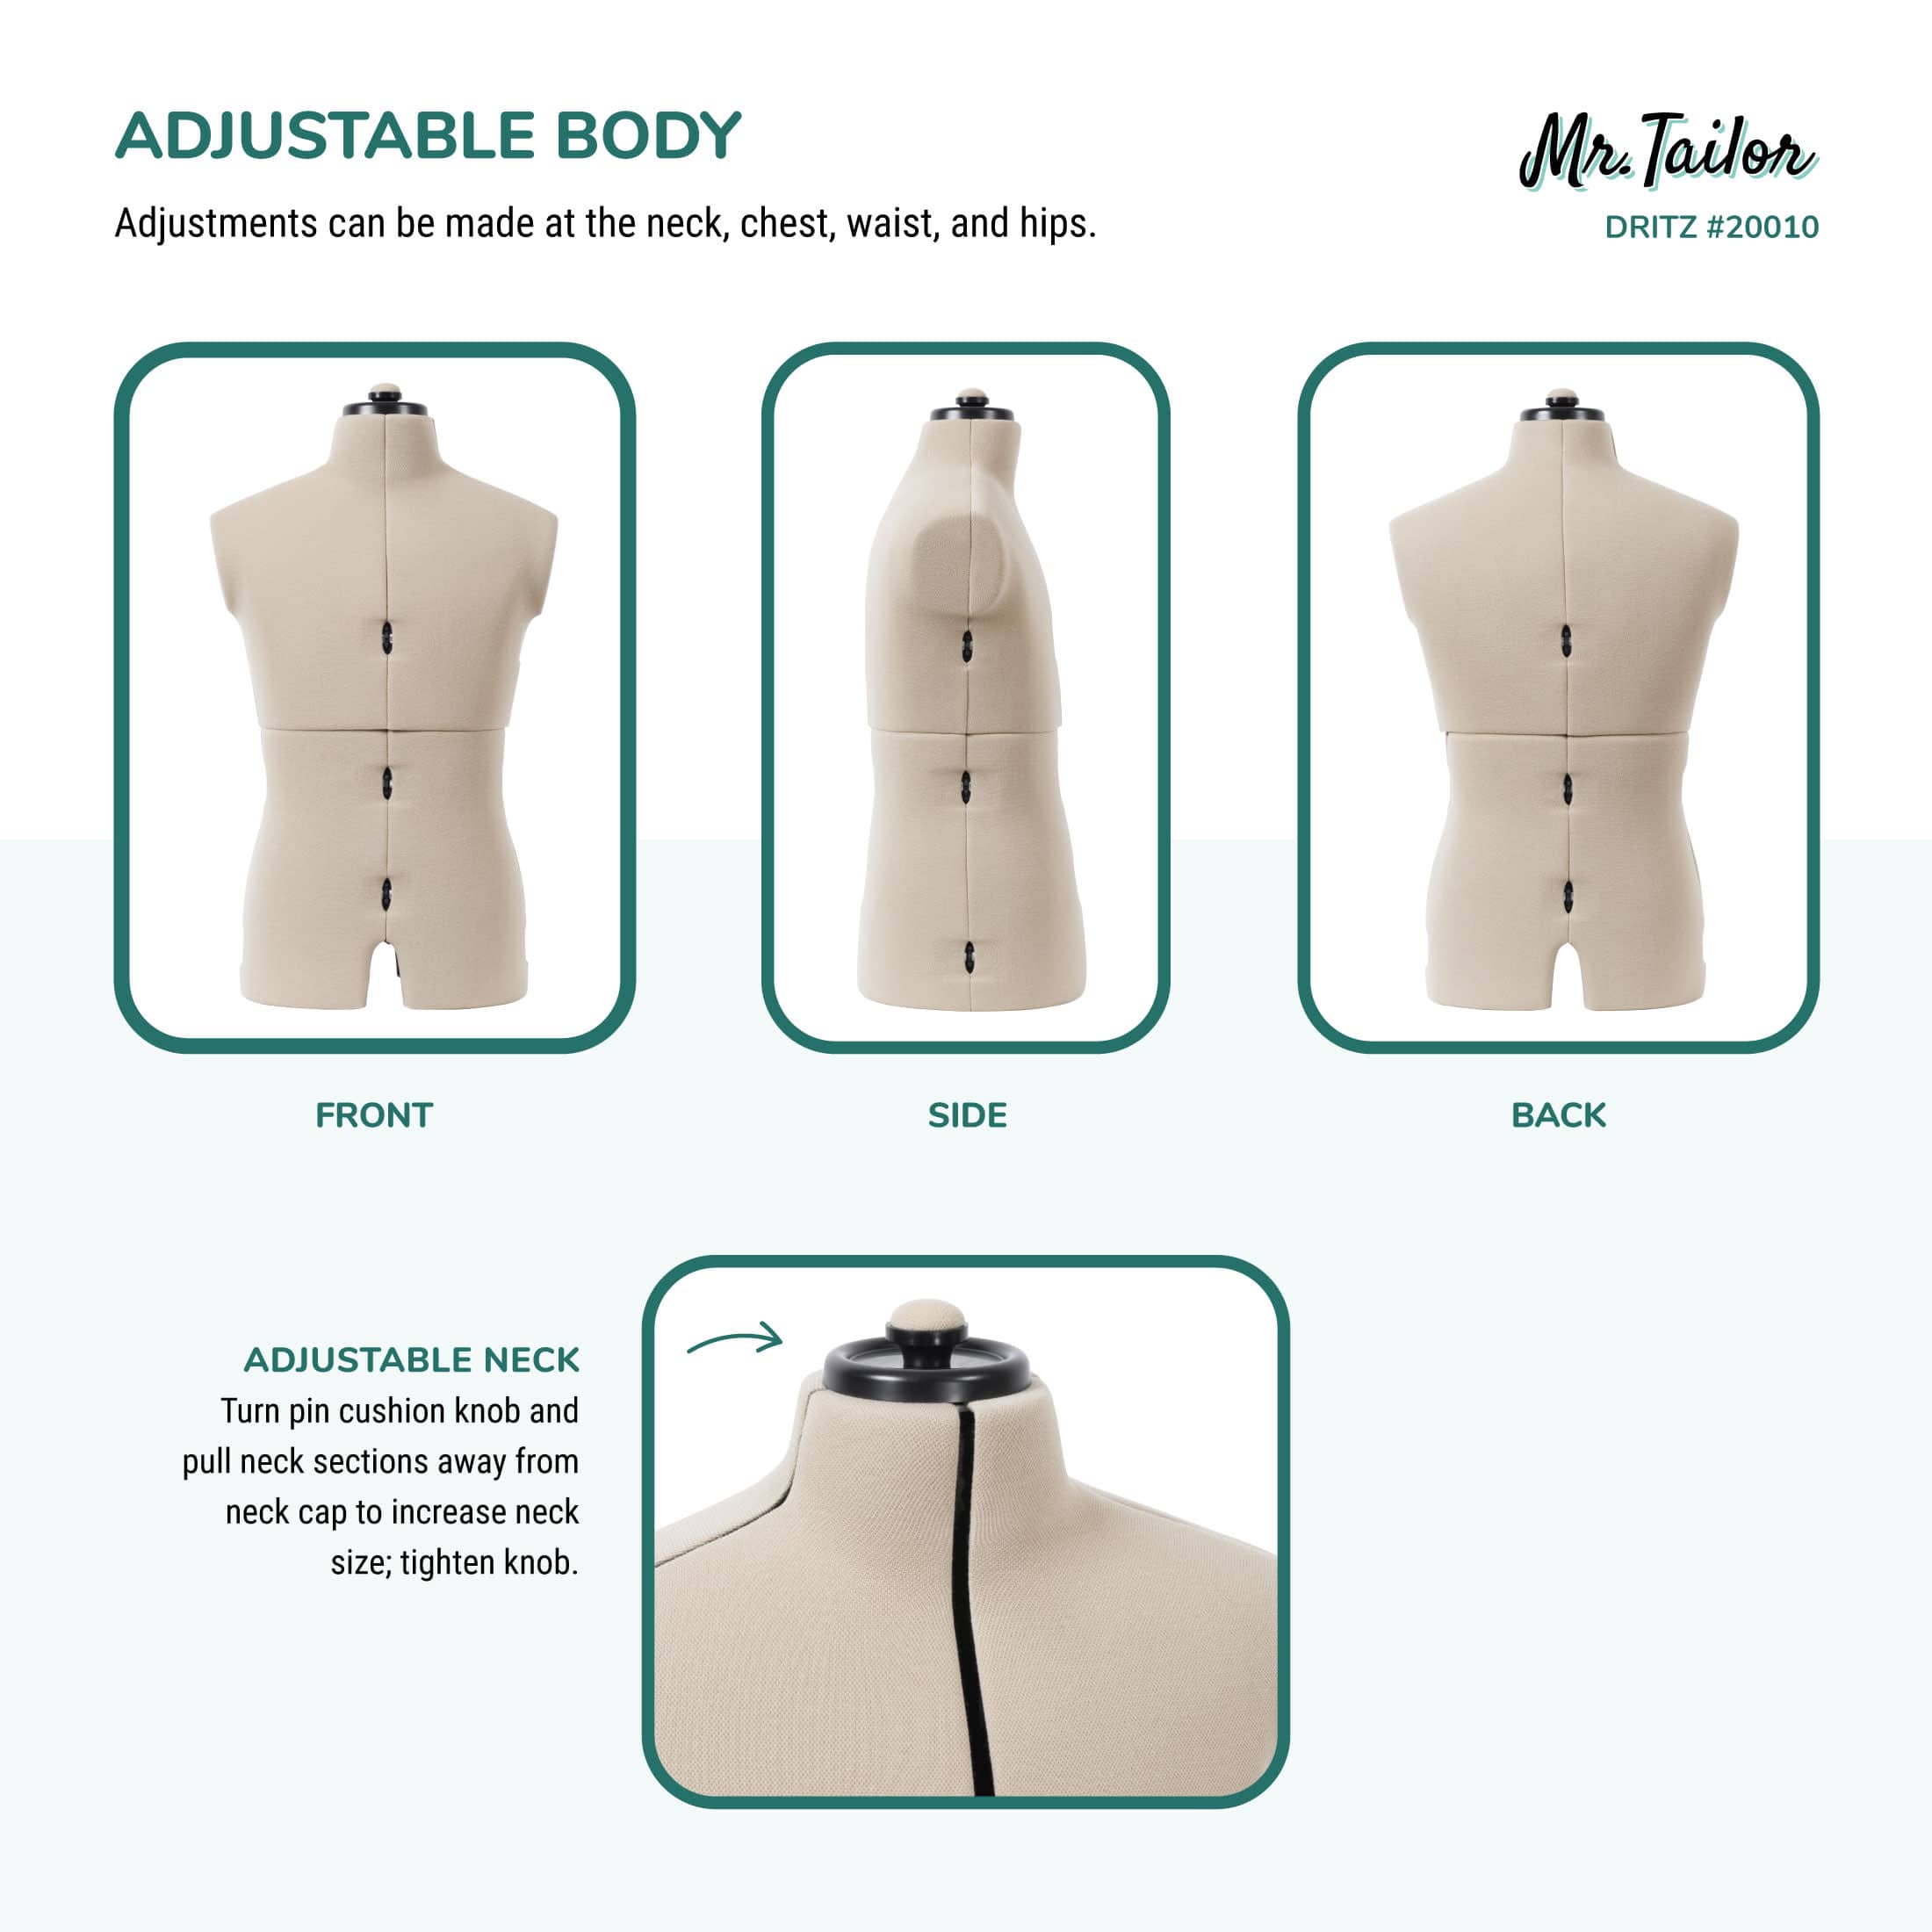 Dritz&#xAE; Mr. Tailor Male Dress Form with Adjustable Tri-Pod Stand